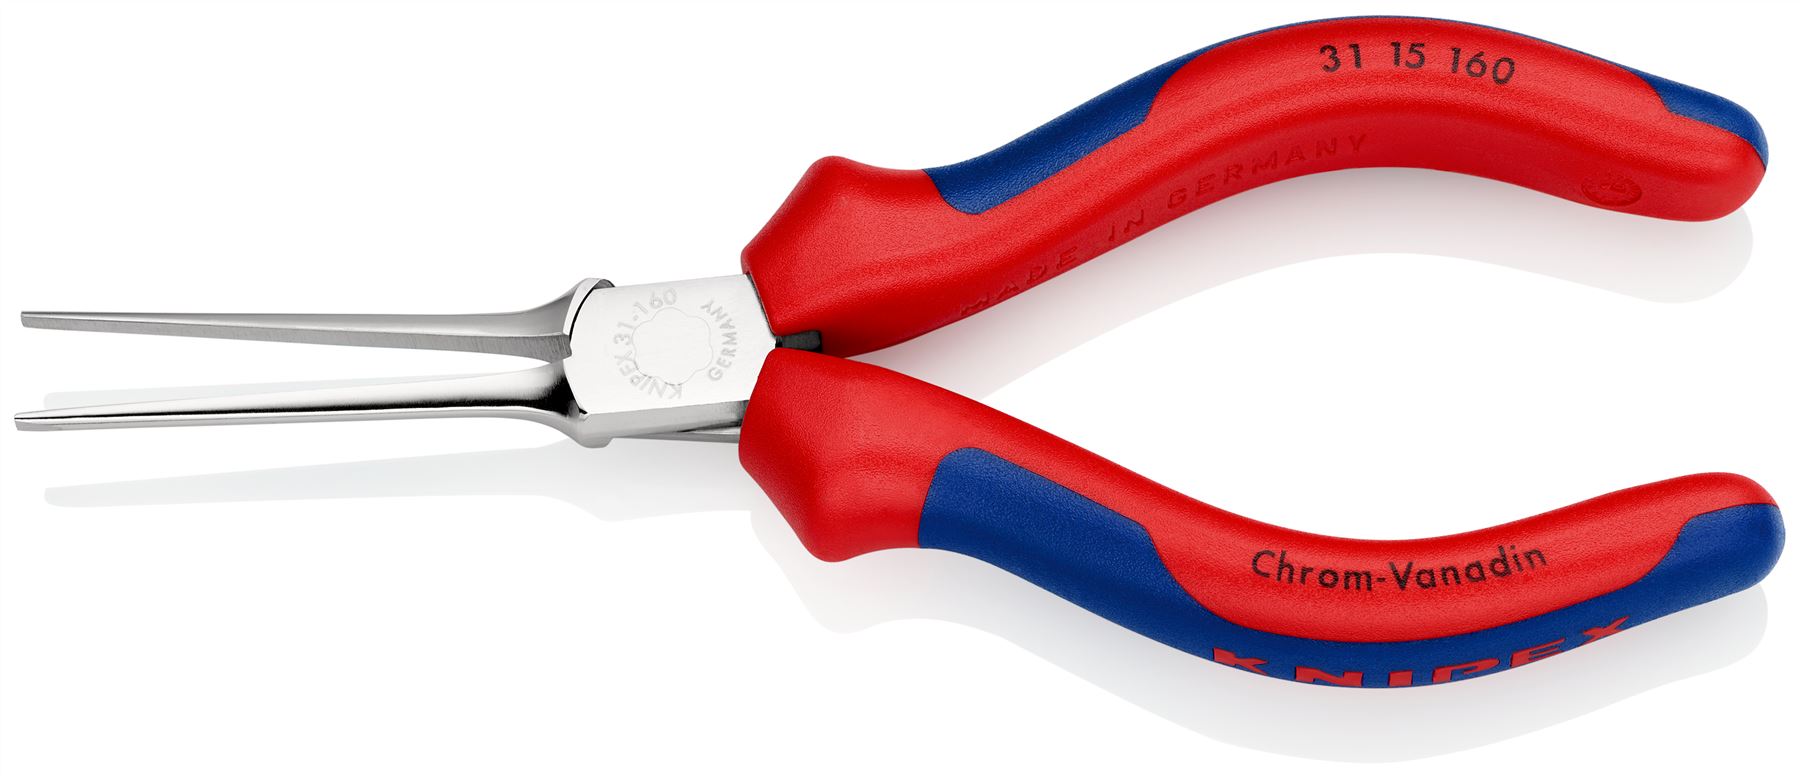 KNIPEX Flat Needle Nose Pliers 160mm Multi Component Grips 31 15 160